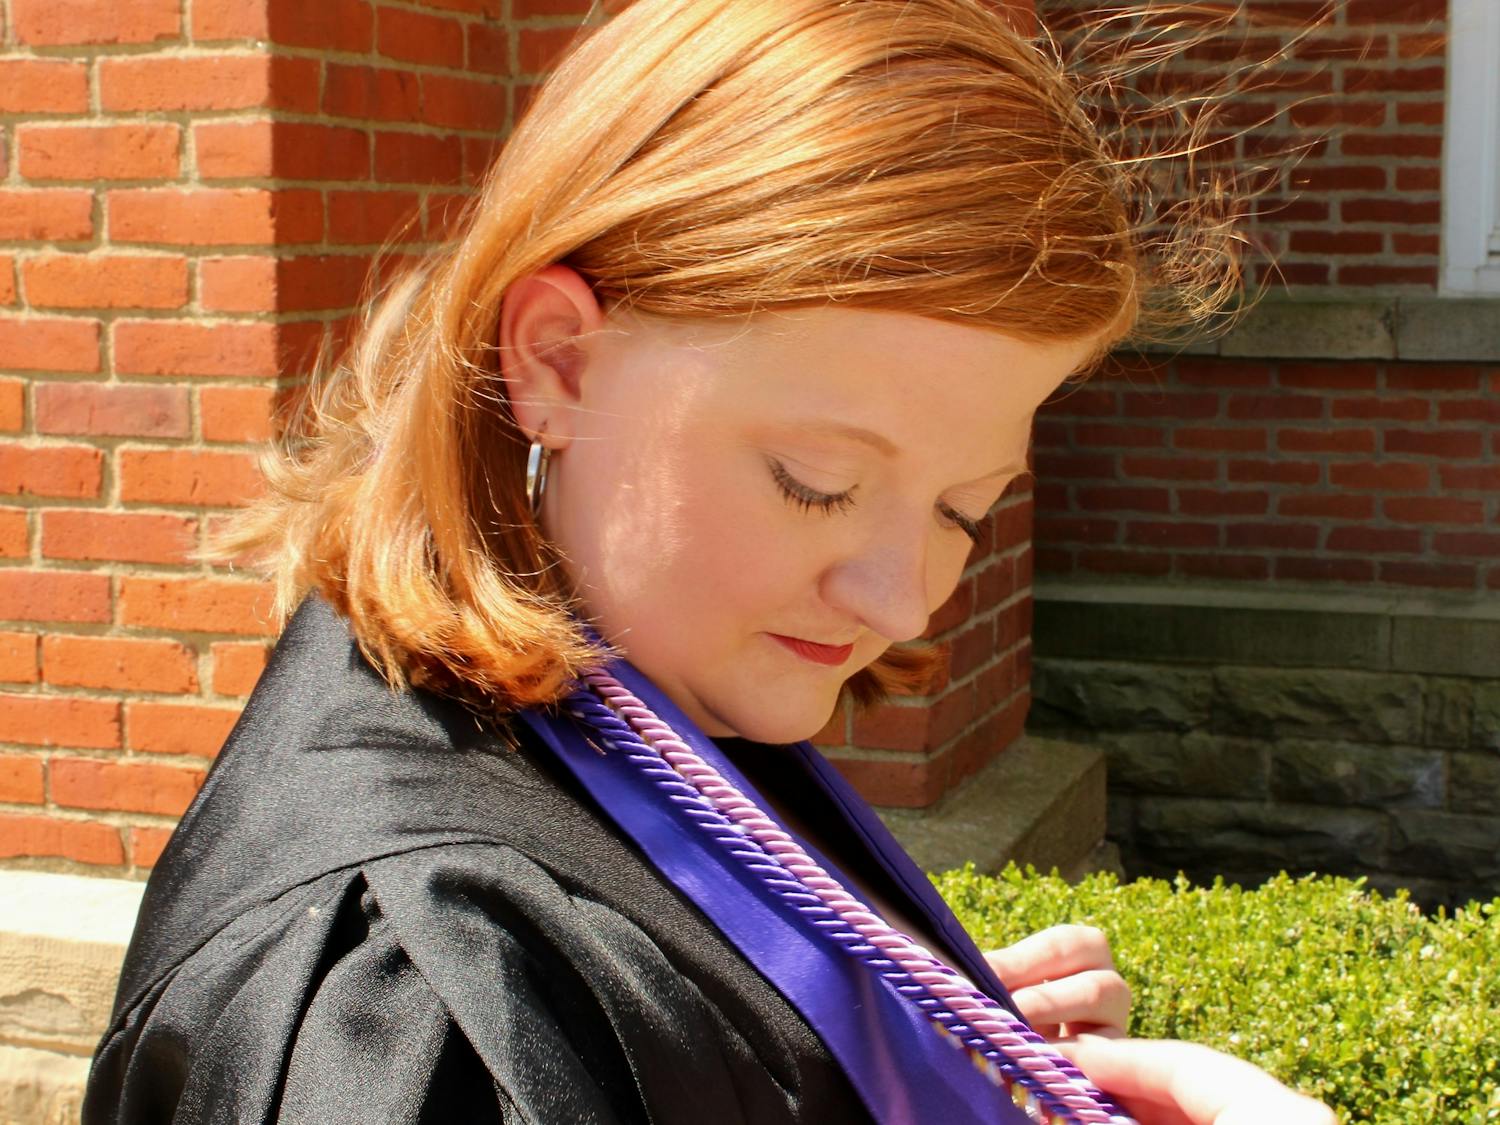 Shay Locke dons their graduation cords prior to the ceremony, which is to be held on May 1, 2022.